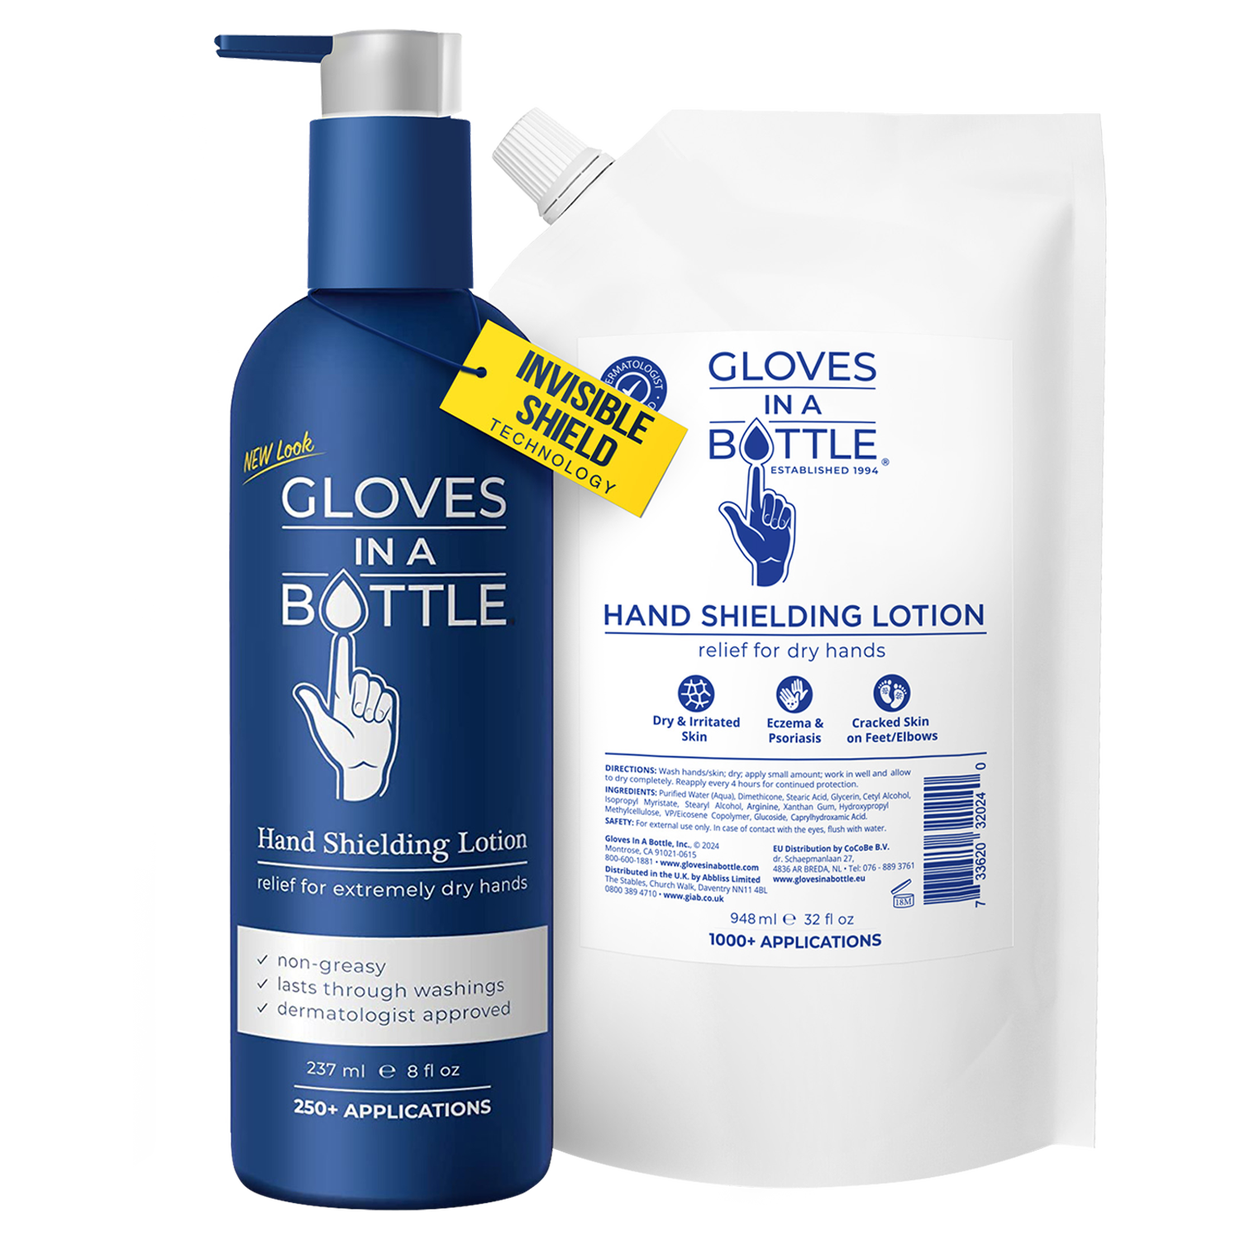 Two bottles of Gloves in a Bottle hand shielding lotion are displayed; one is an 8-ounce blue bottle and the other is a 32-ounce white refill bottle, both marked for relief of dry hands.